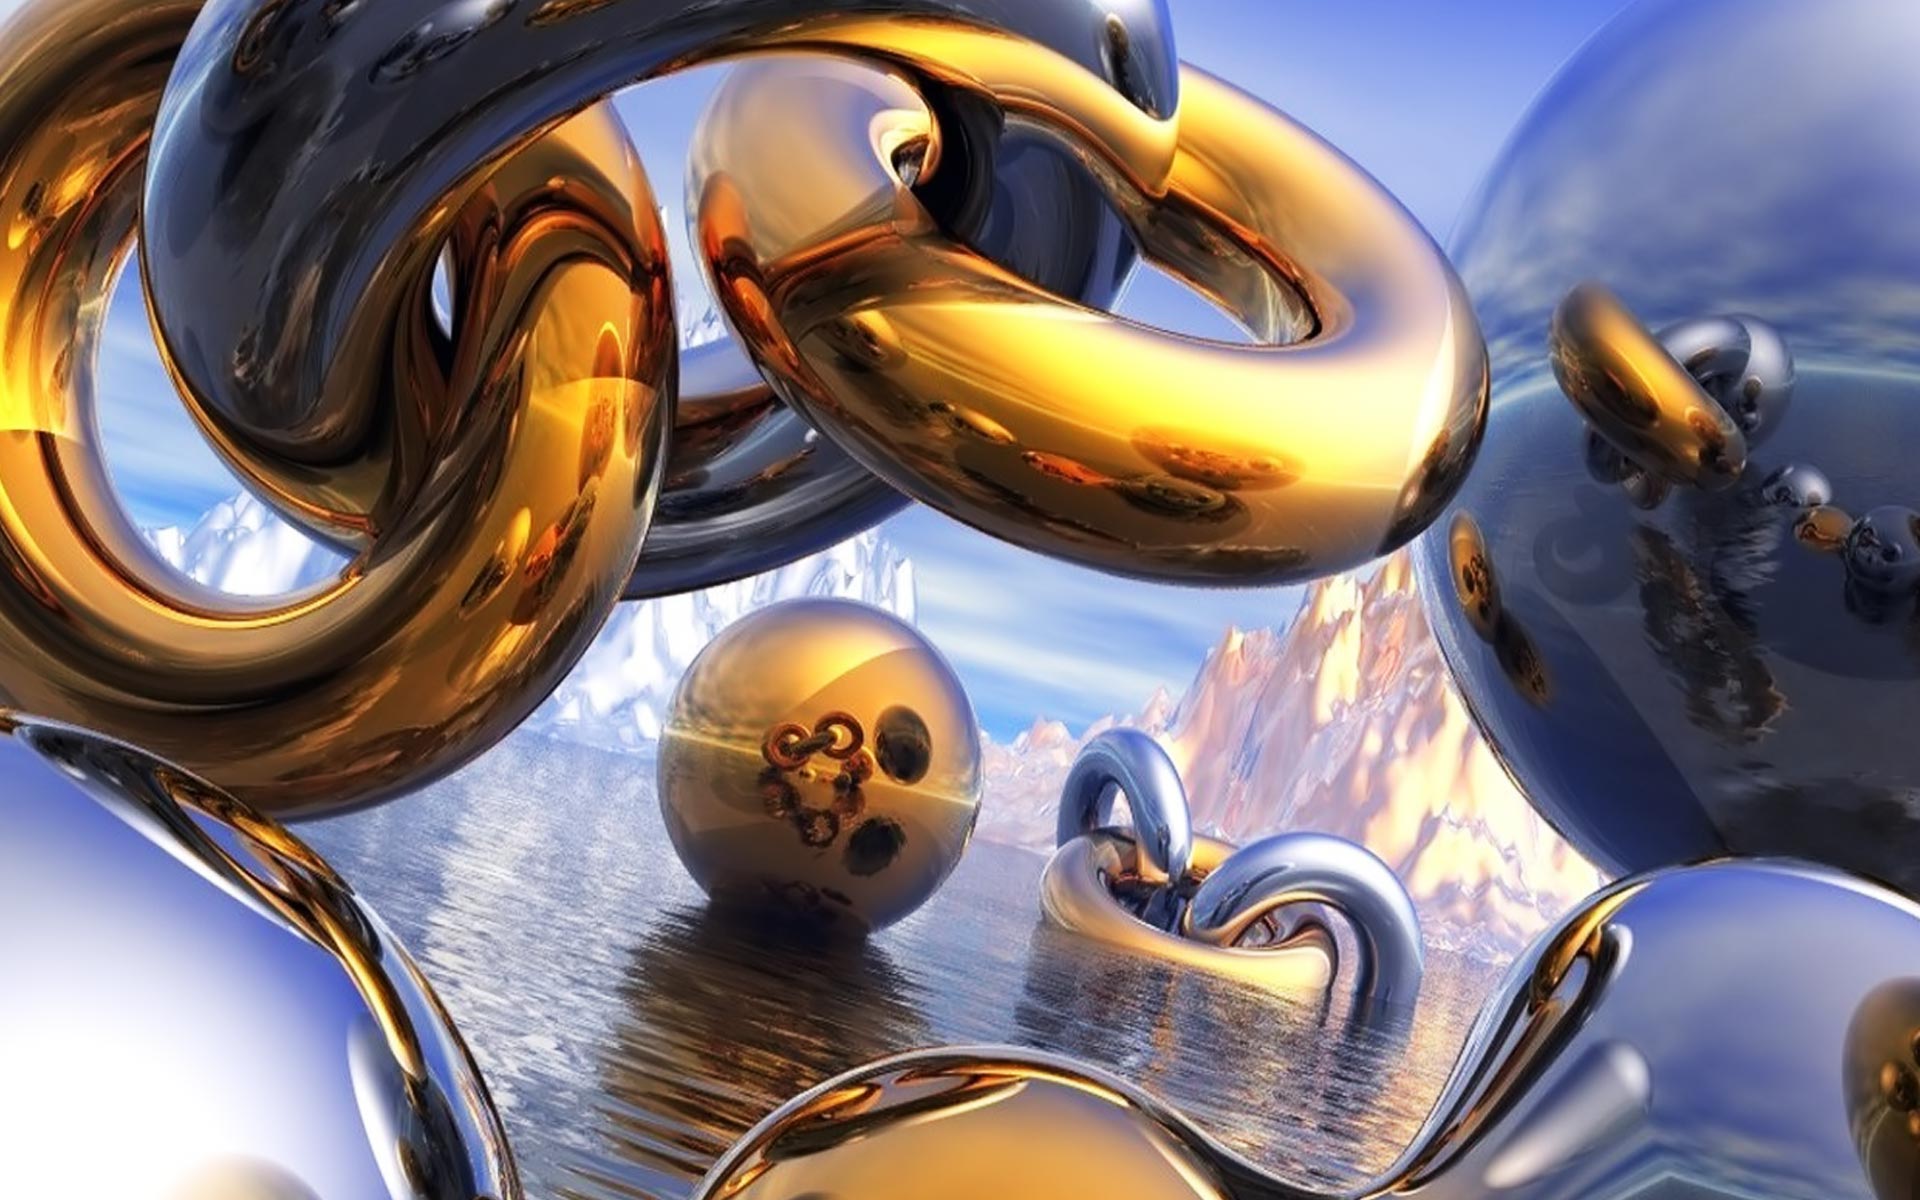 3d, sphere, metal, abstract, gold, cgi, water